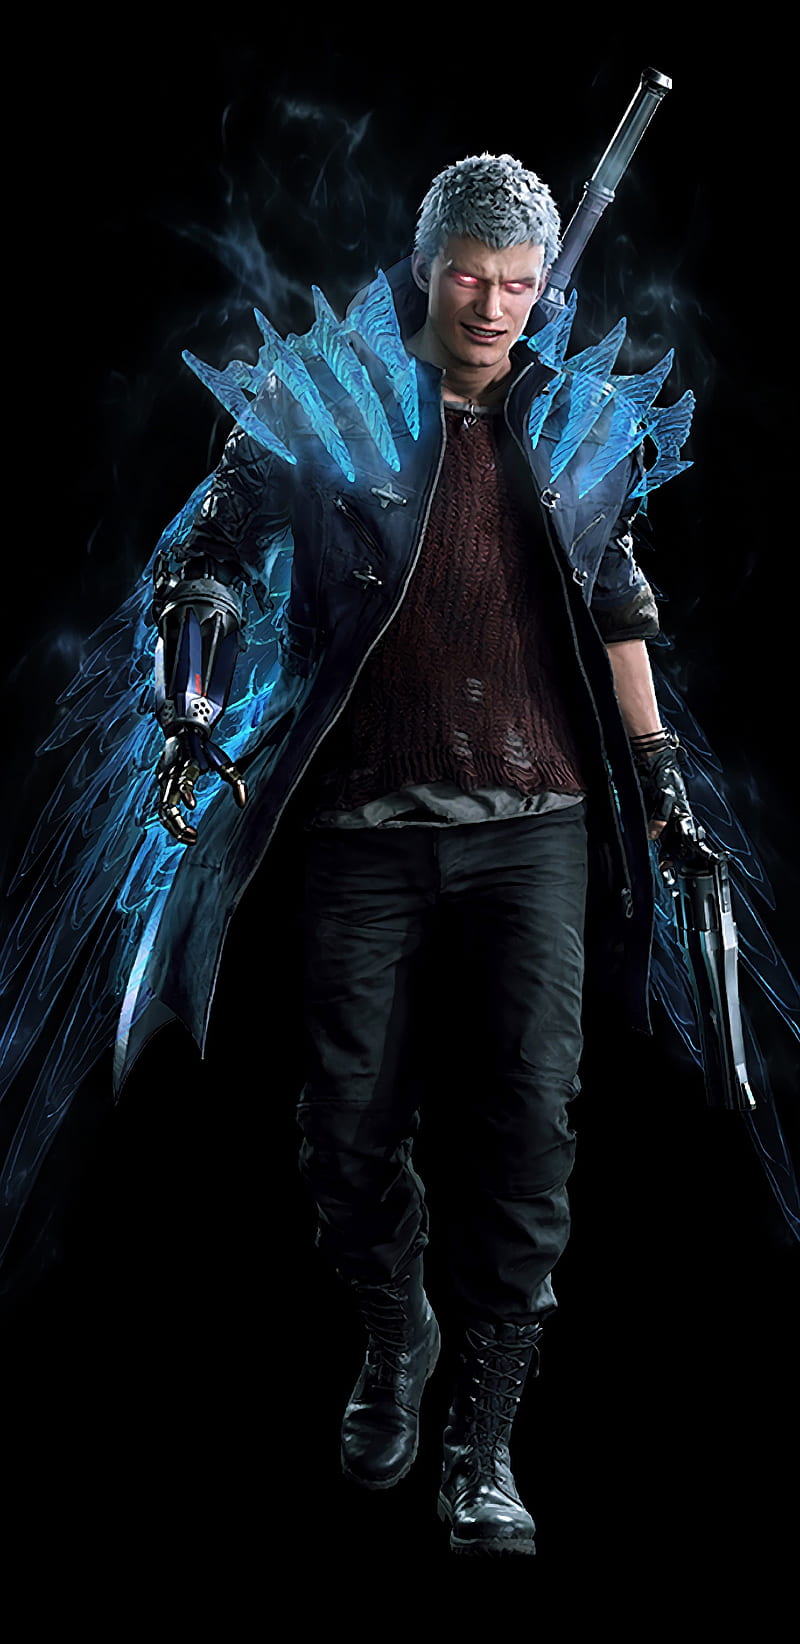 Wallpaper ID 401568  Video Game Devil May Cry 5 Phone Wallpaper Nero Devil  May Cry 1080x1920 free download